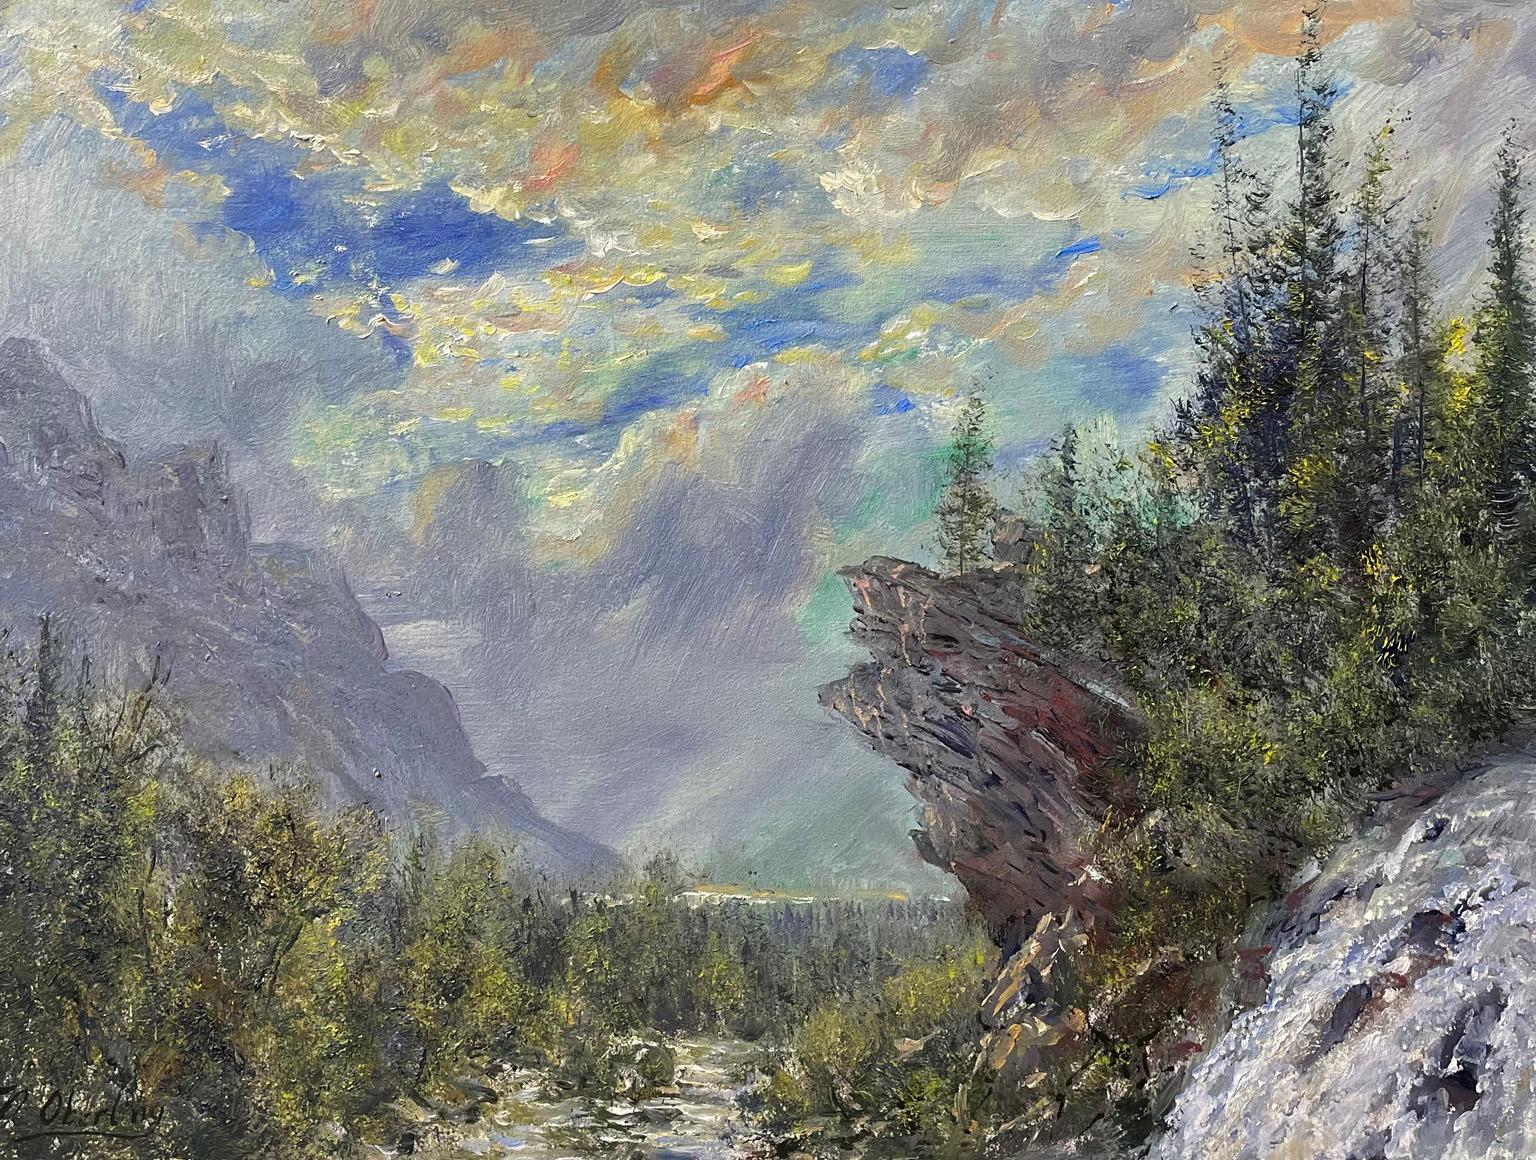 Nicholas Oberling Landscape Painting - Lower Virginia Falls from the Trail in Glacier National Park